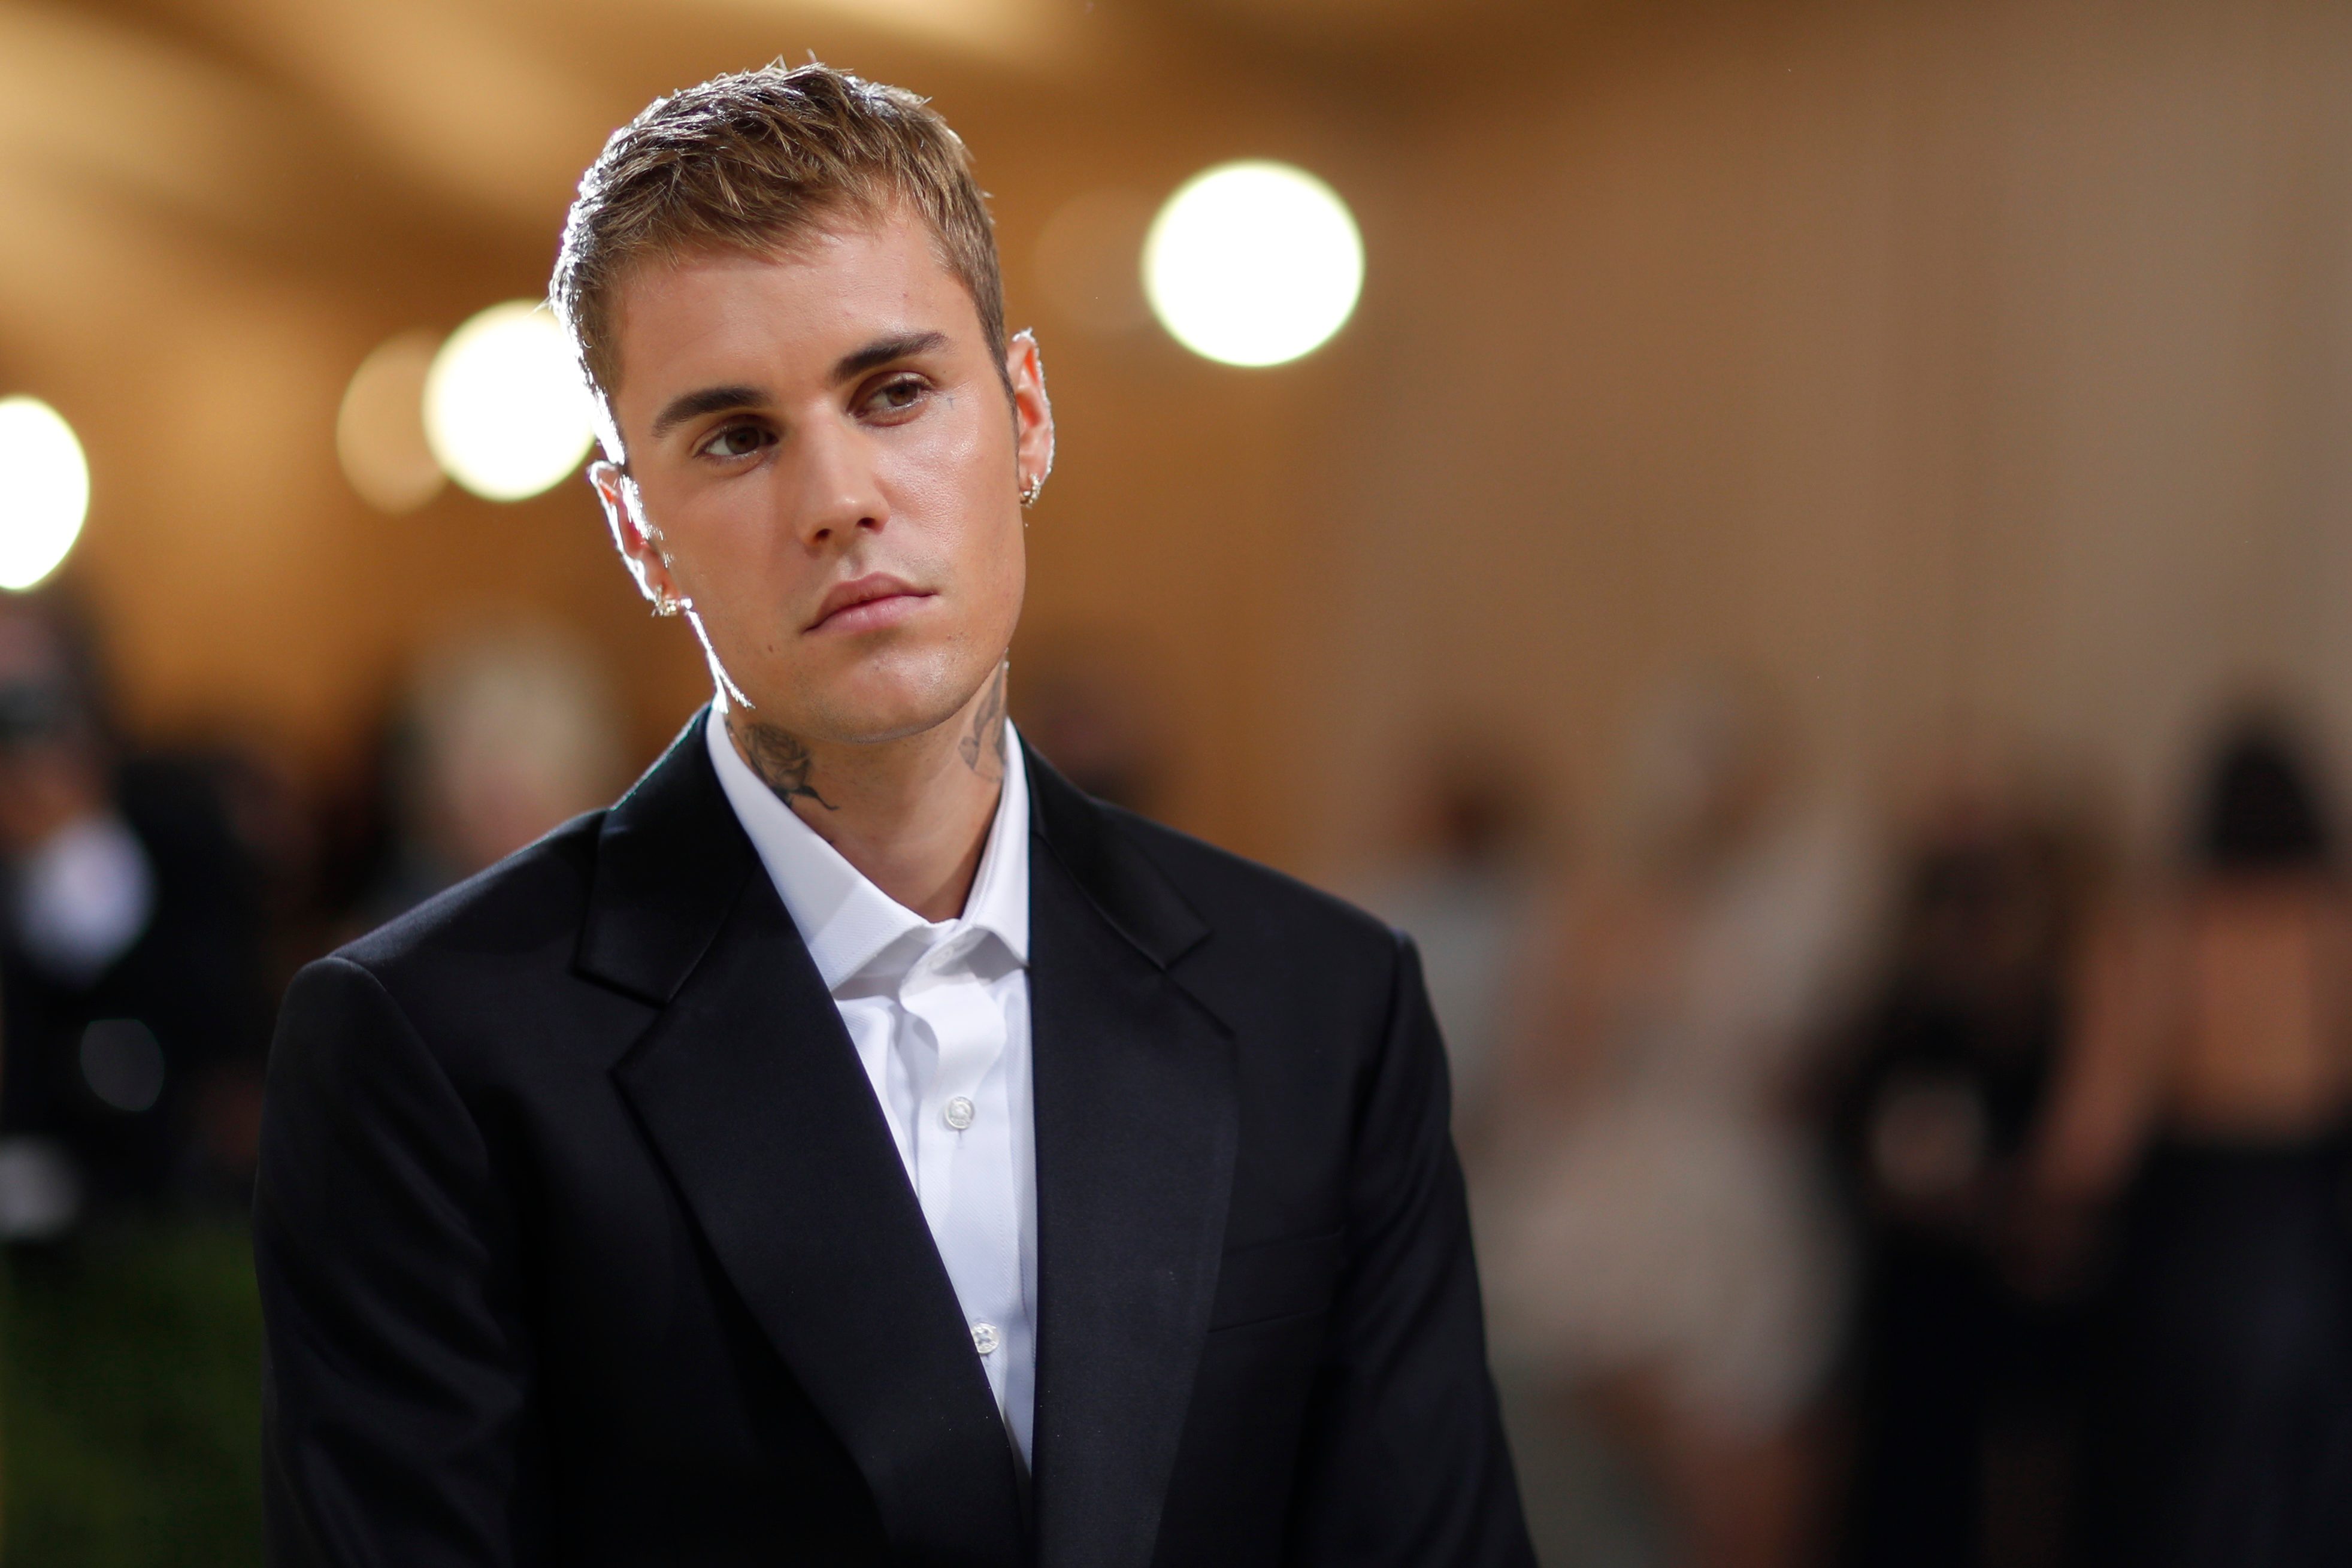 Justin Bieber launches new weed venture with ‘Peaches’ cannabis line